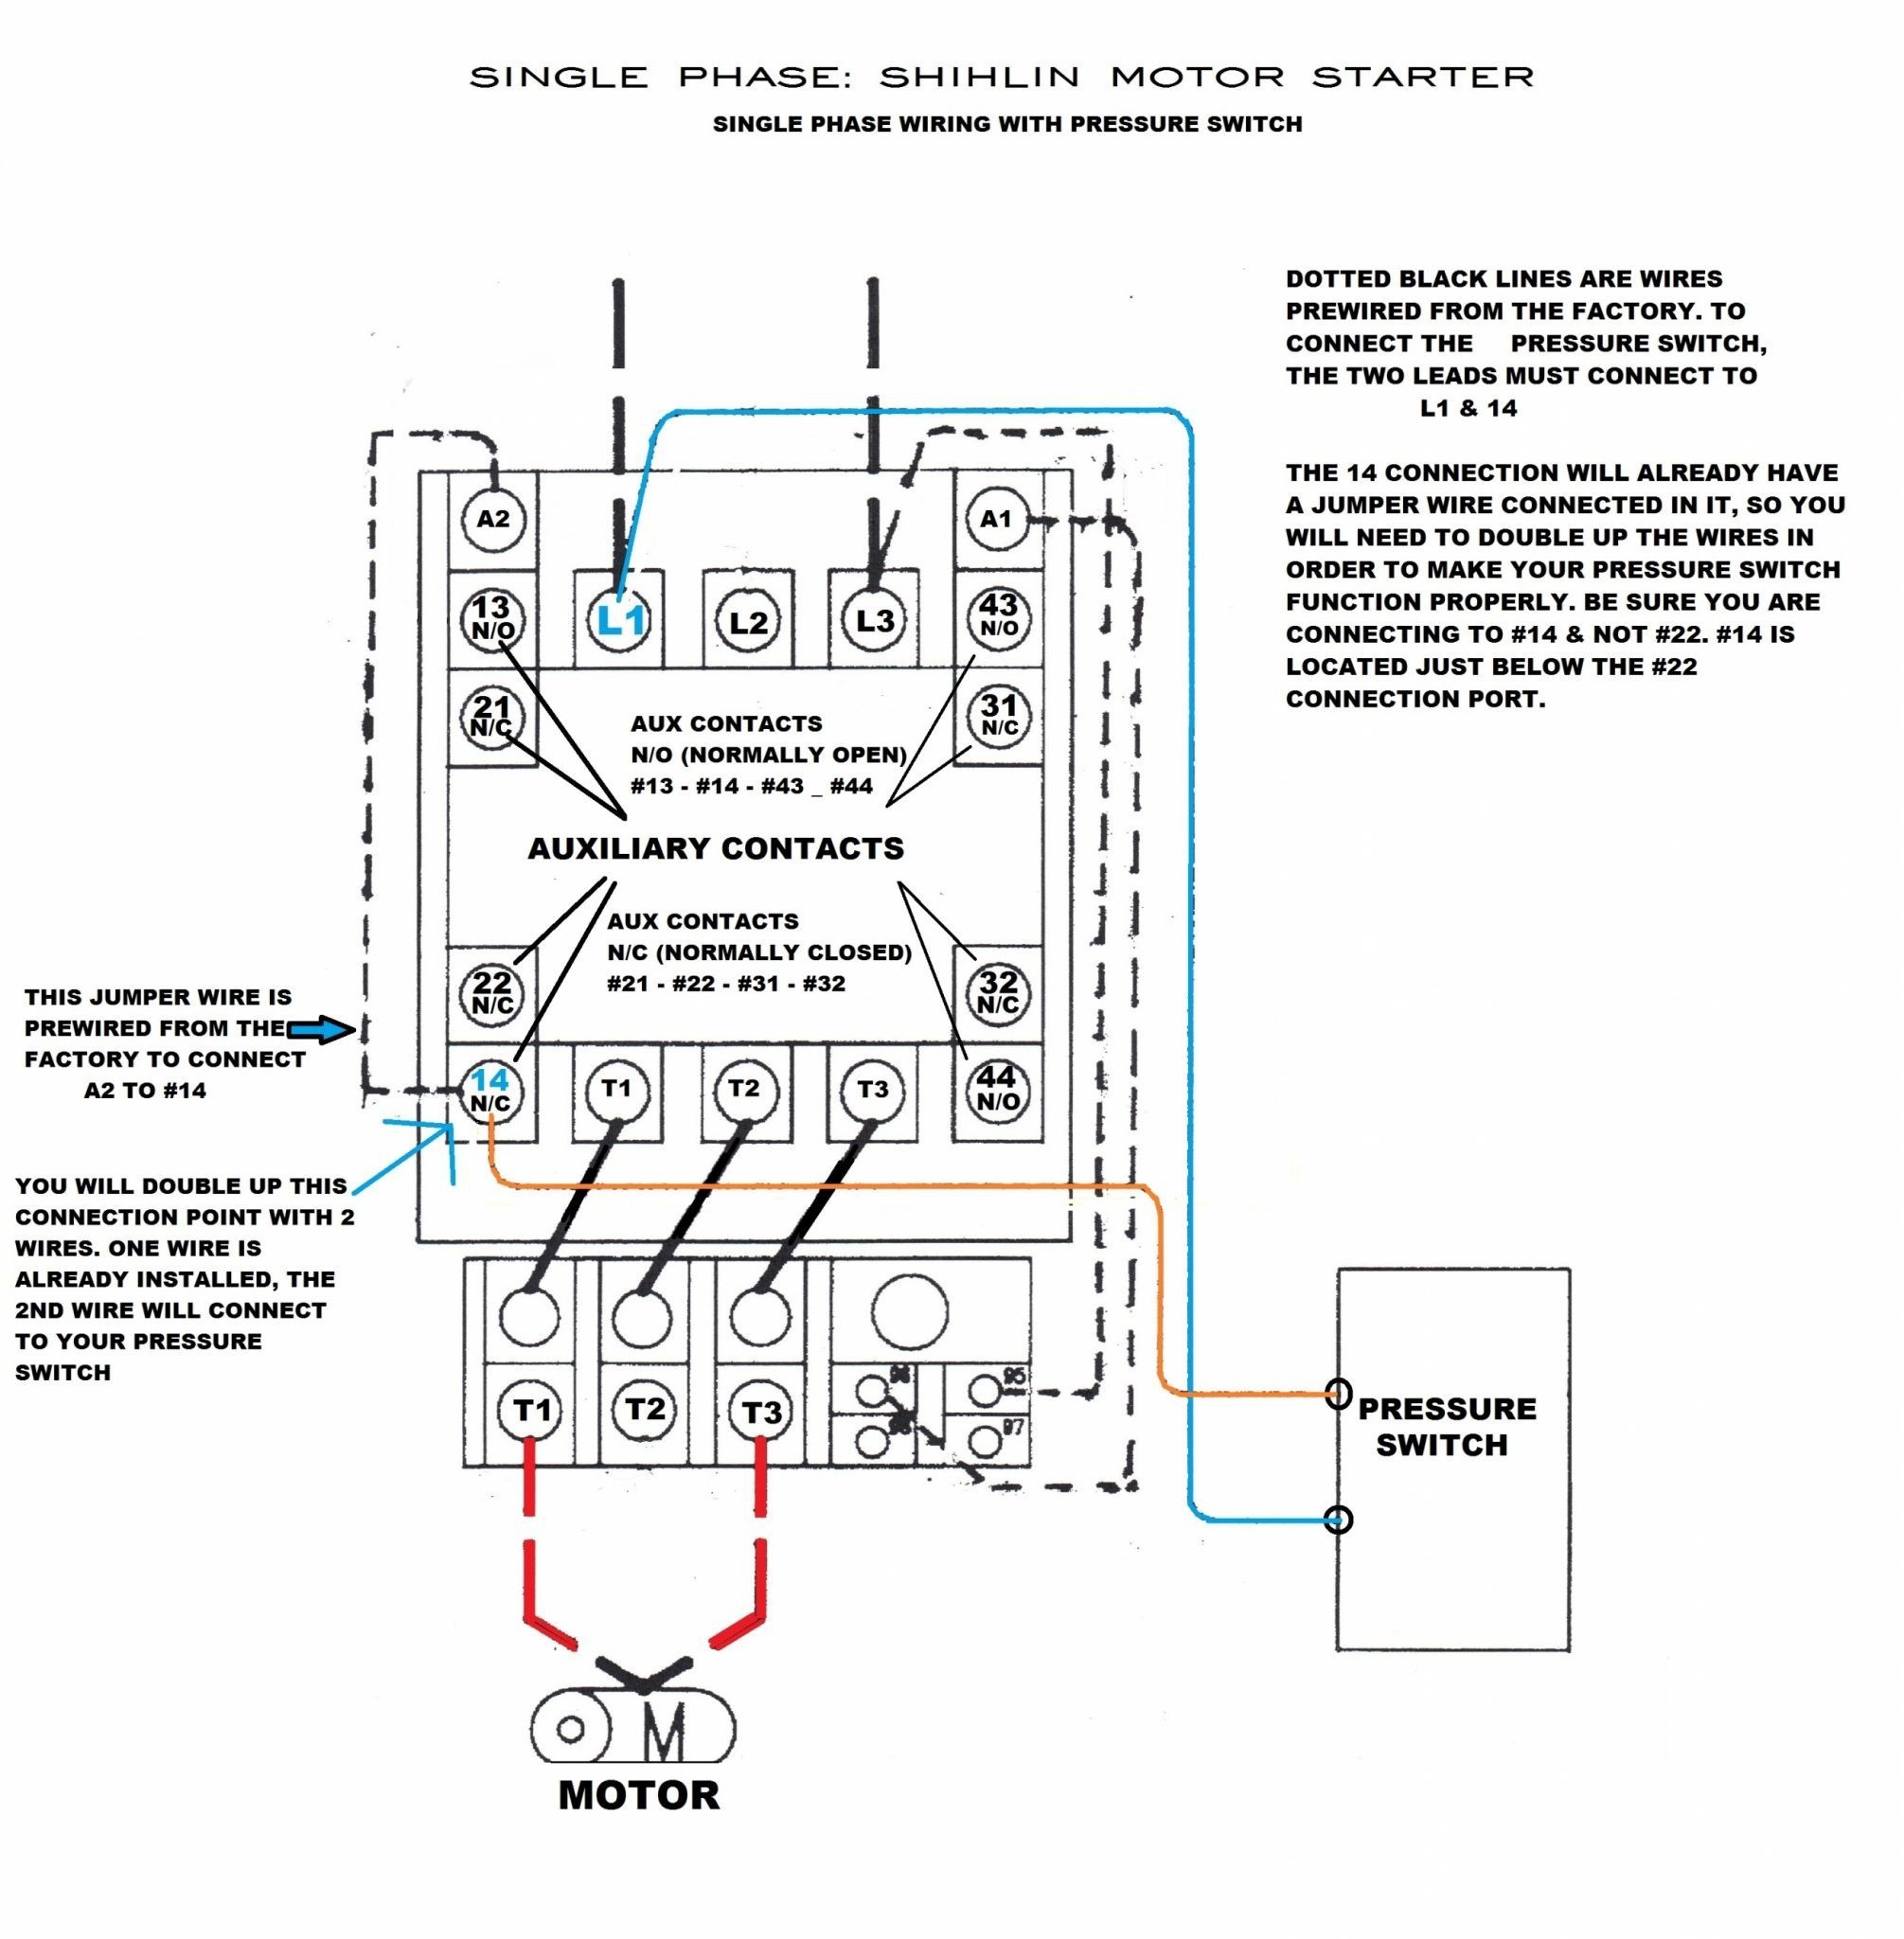 square d motor starter wiring diagram Collection Square D Air pressor Pressure Switch Wiring Diagram DOWNLOAD Wiring Diagram Pics Detail Name square d